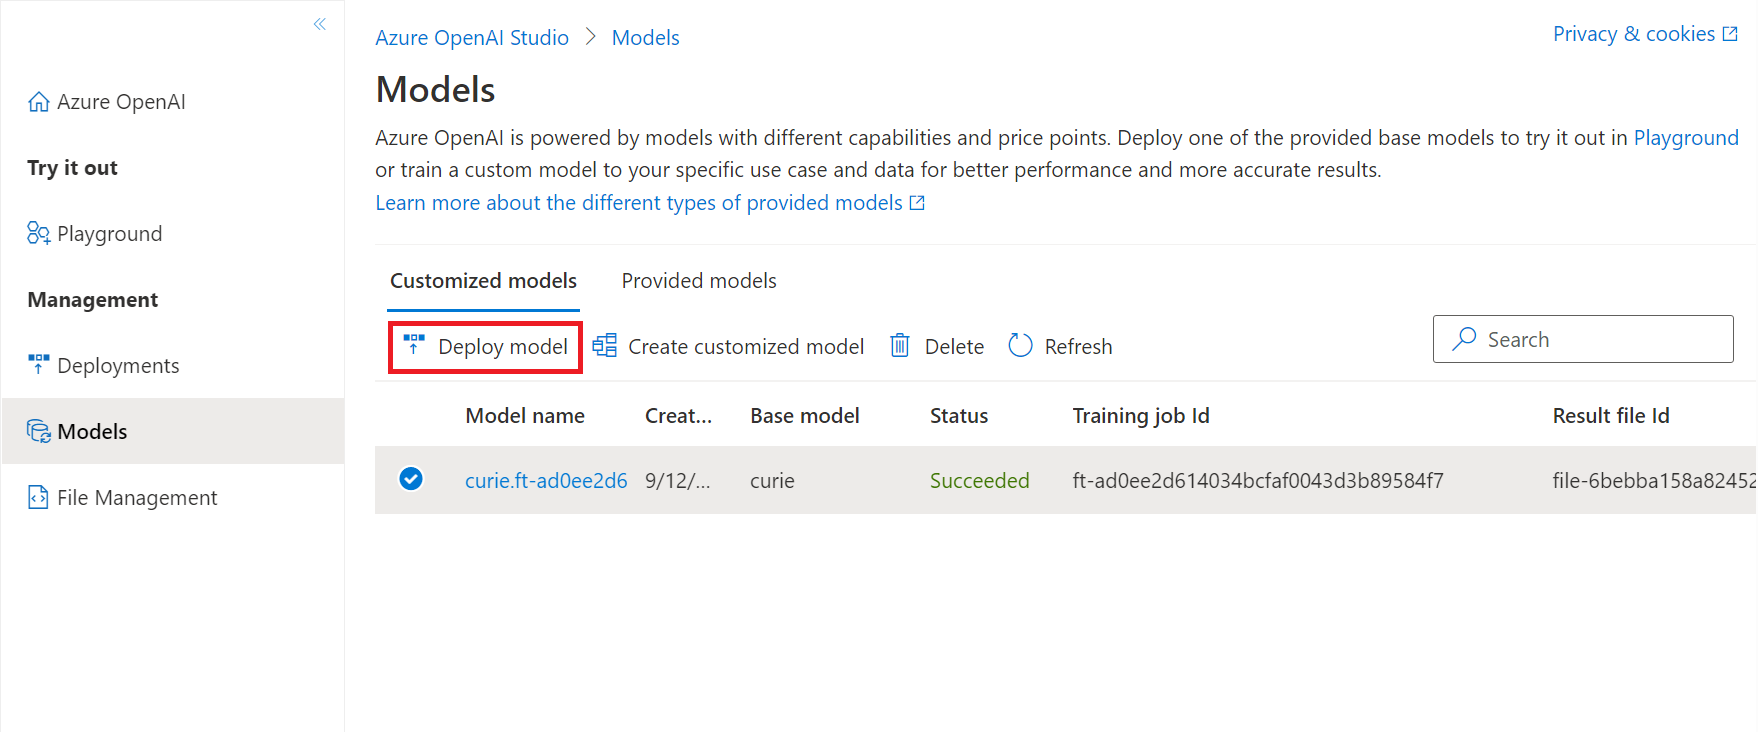 Screenshot of the Models page from Azure OpenAI Studio, with the Deploy model button highlighted.